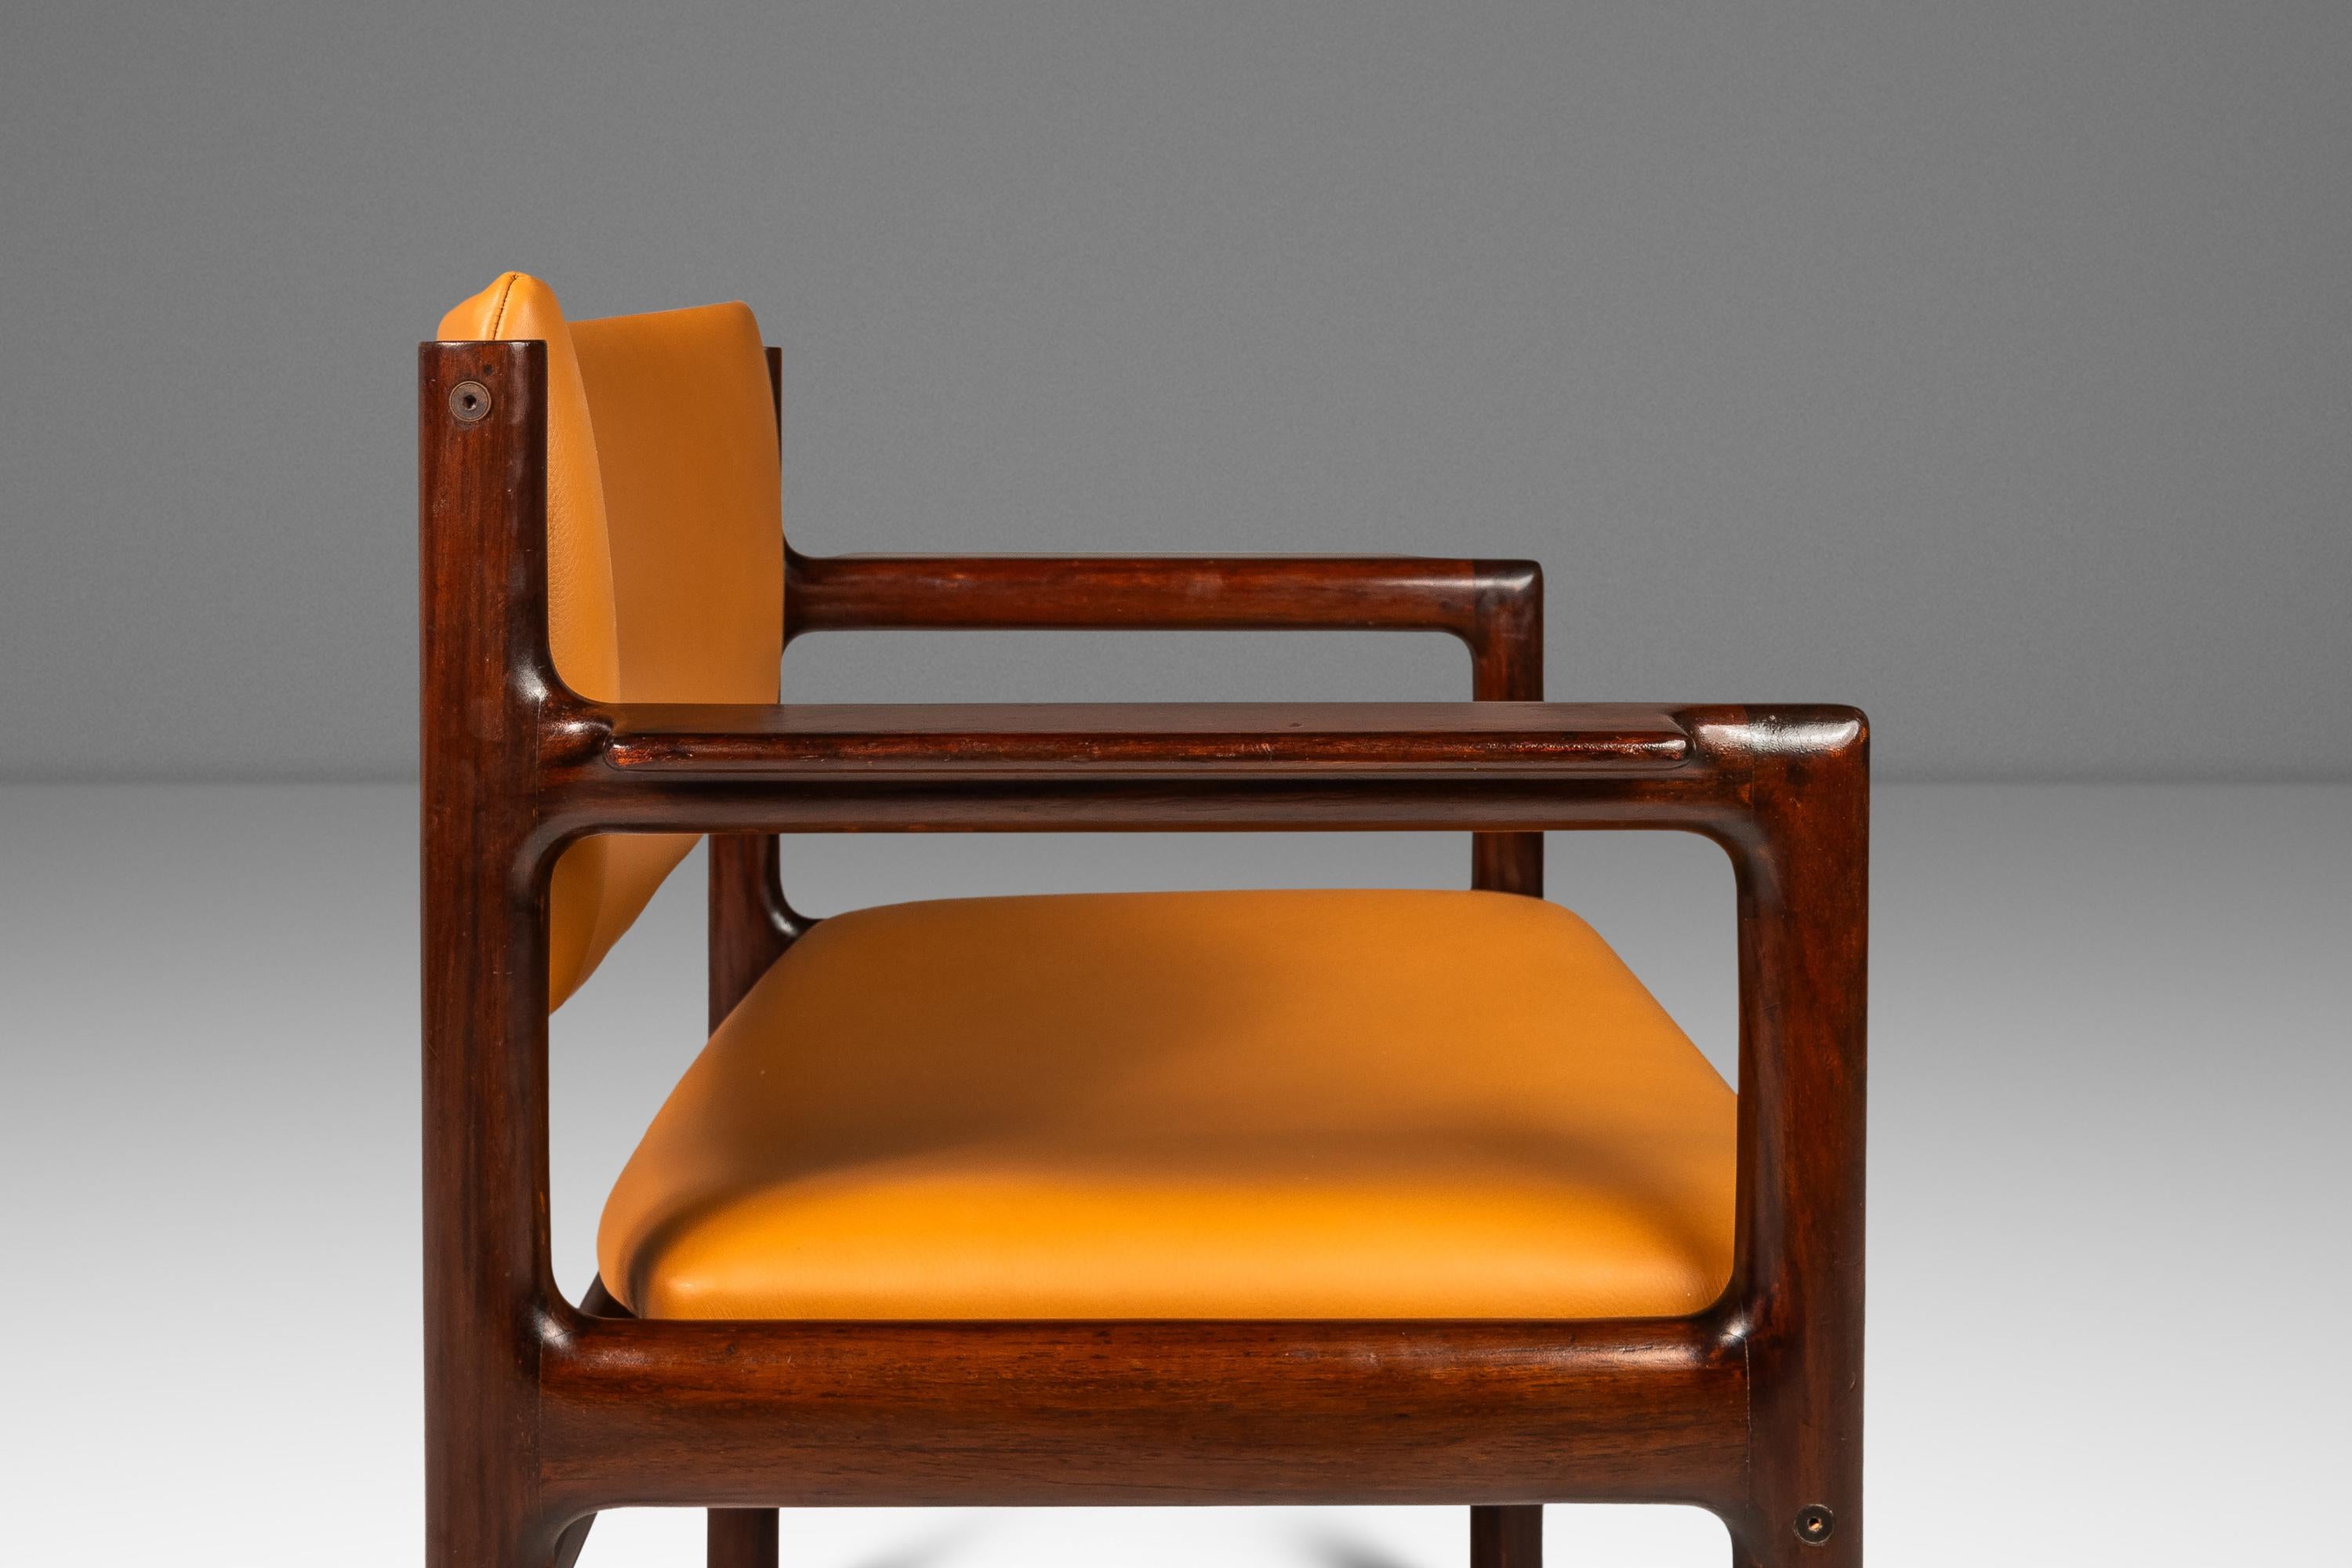 Set of 6 Mahogany & Leather Arm Chairs, by Danish Overseas Imports, c. 1960's For Sale 11